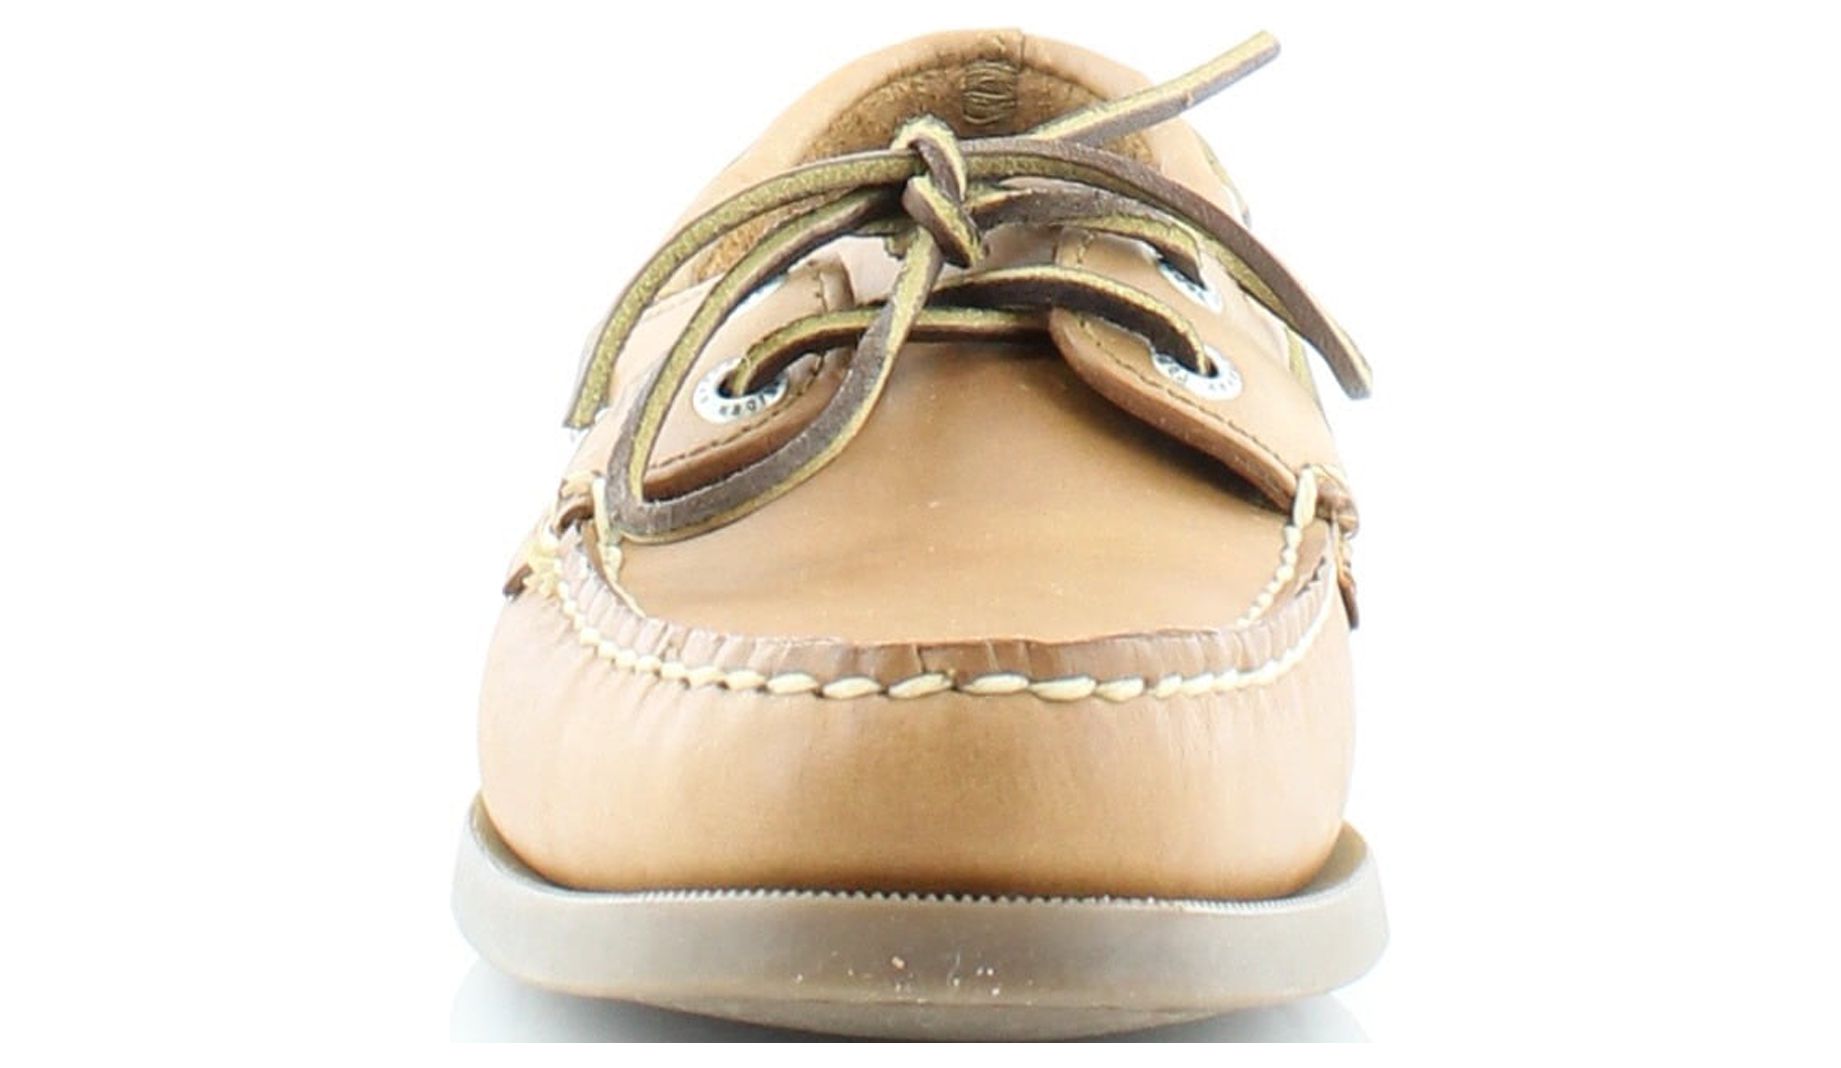 Sperry Top-Sider A/O 2-Eye Women's Loafers & Slip-Ons - image 3 of 5